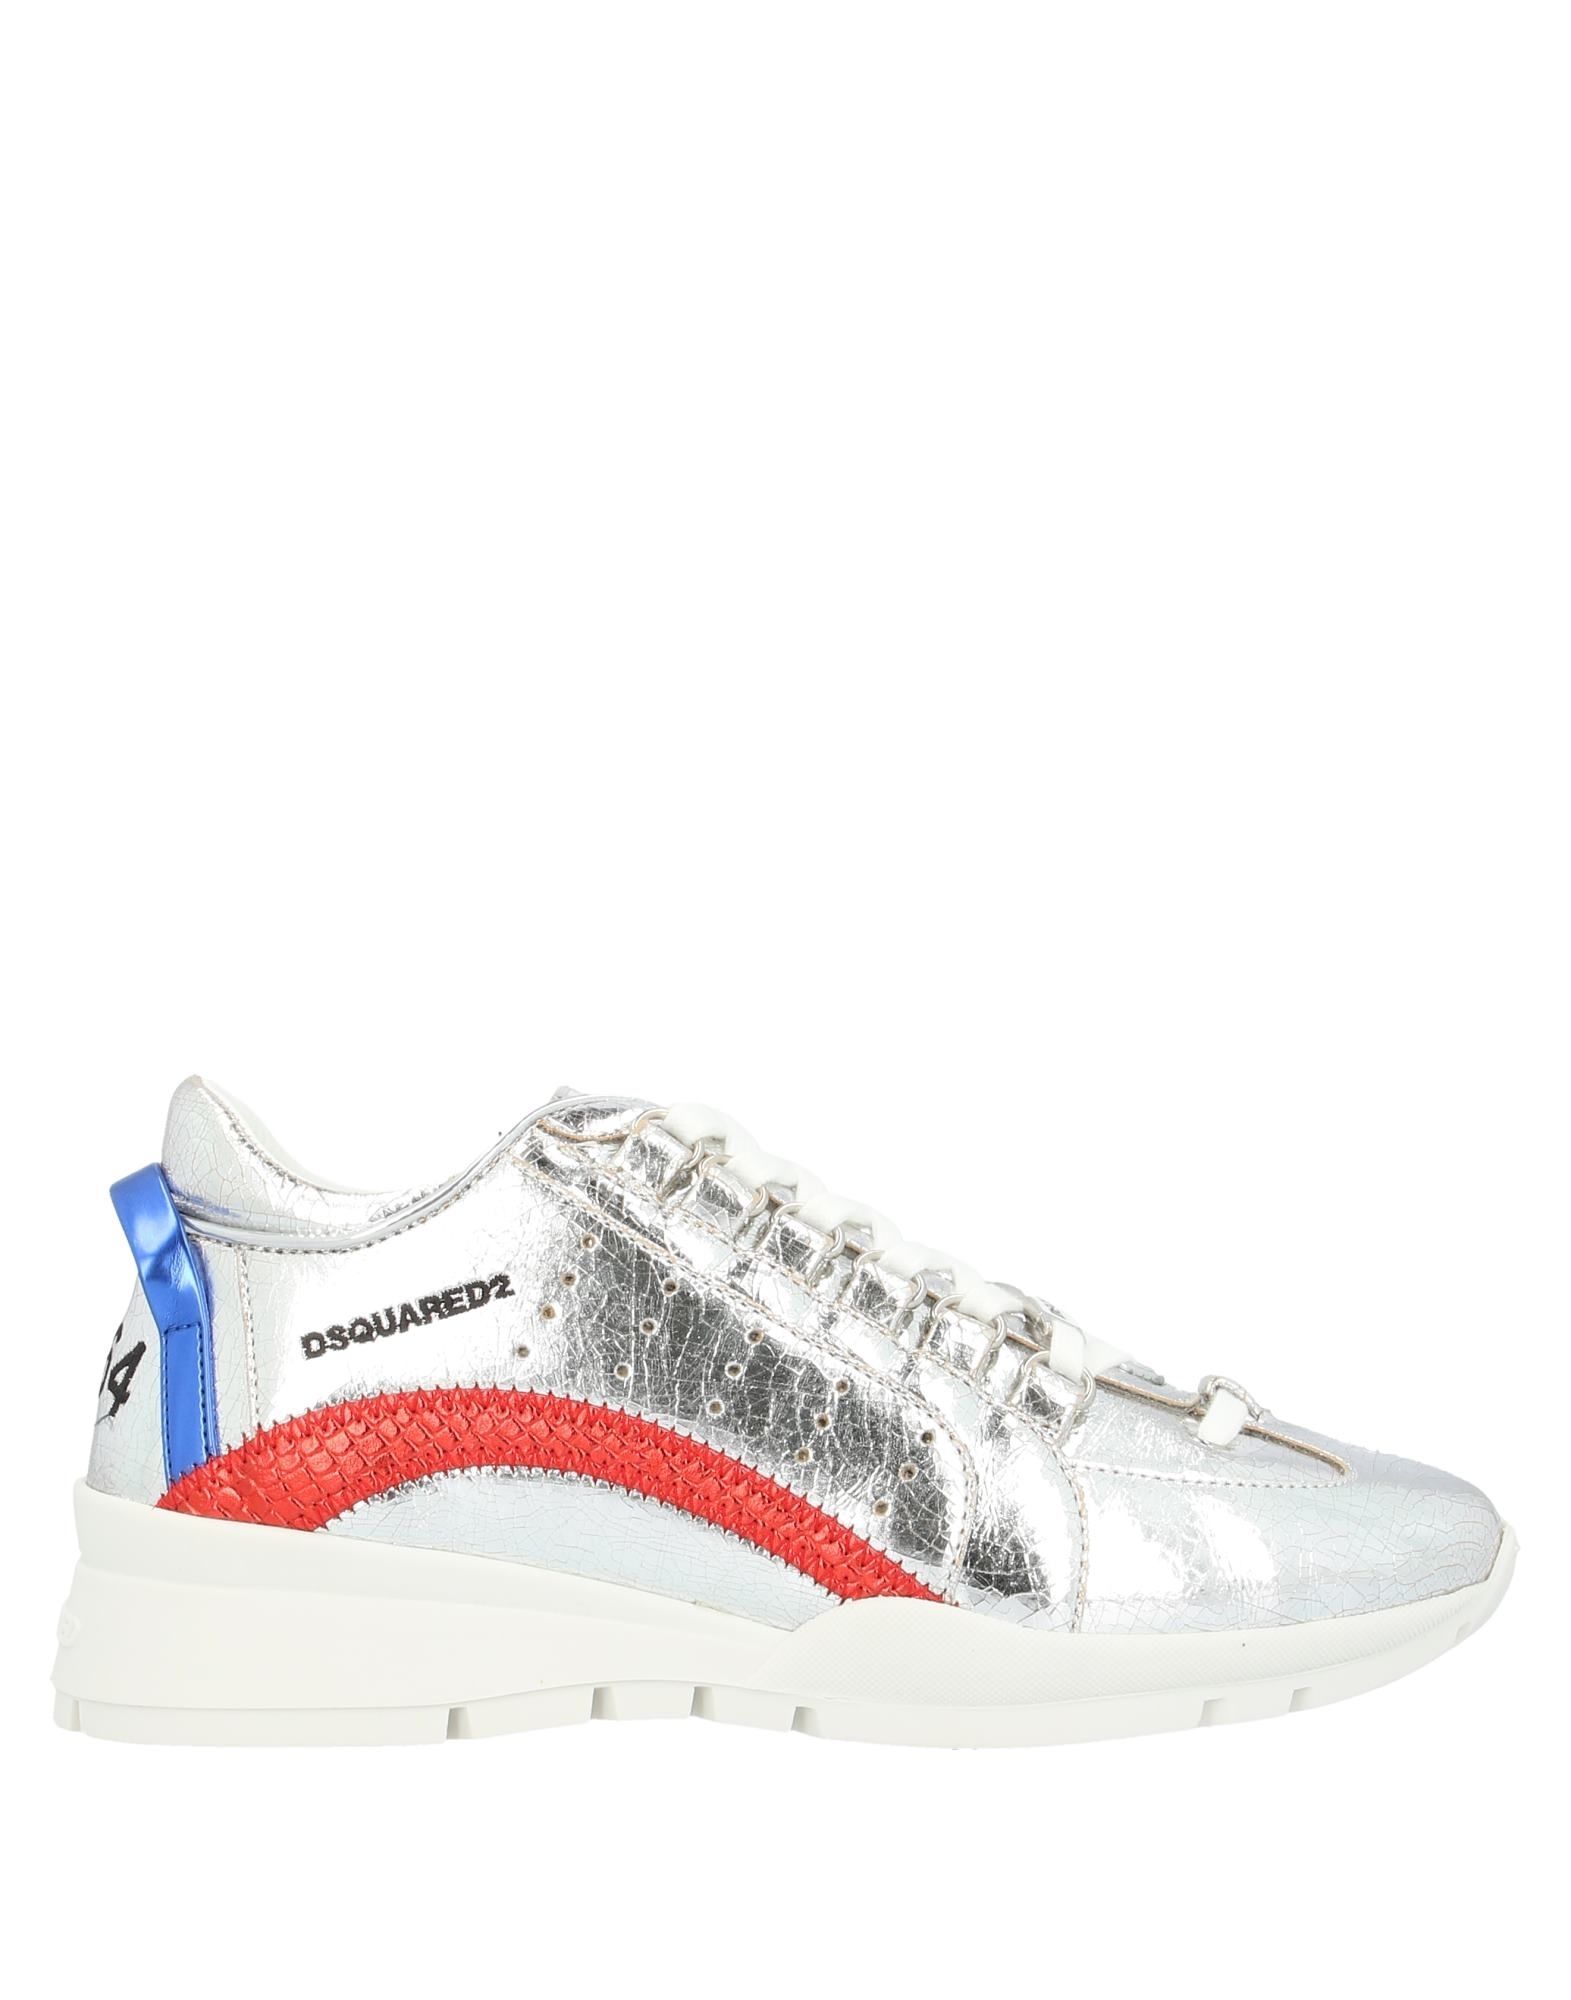 DSQUARED2 Low-tops & sneakers - Item 11800429